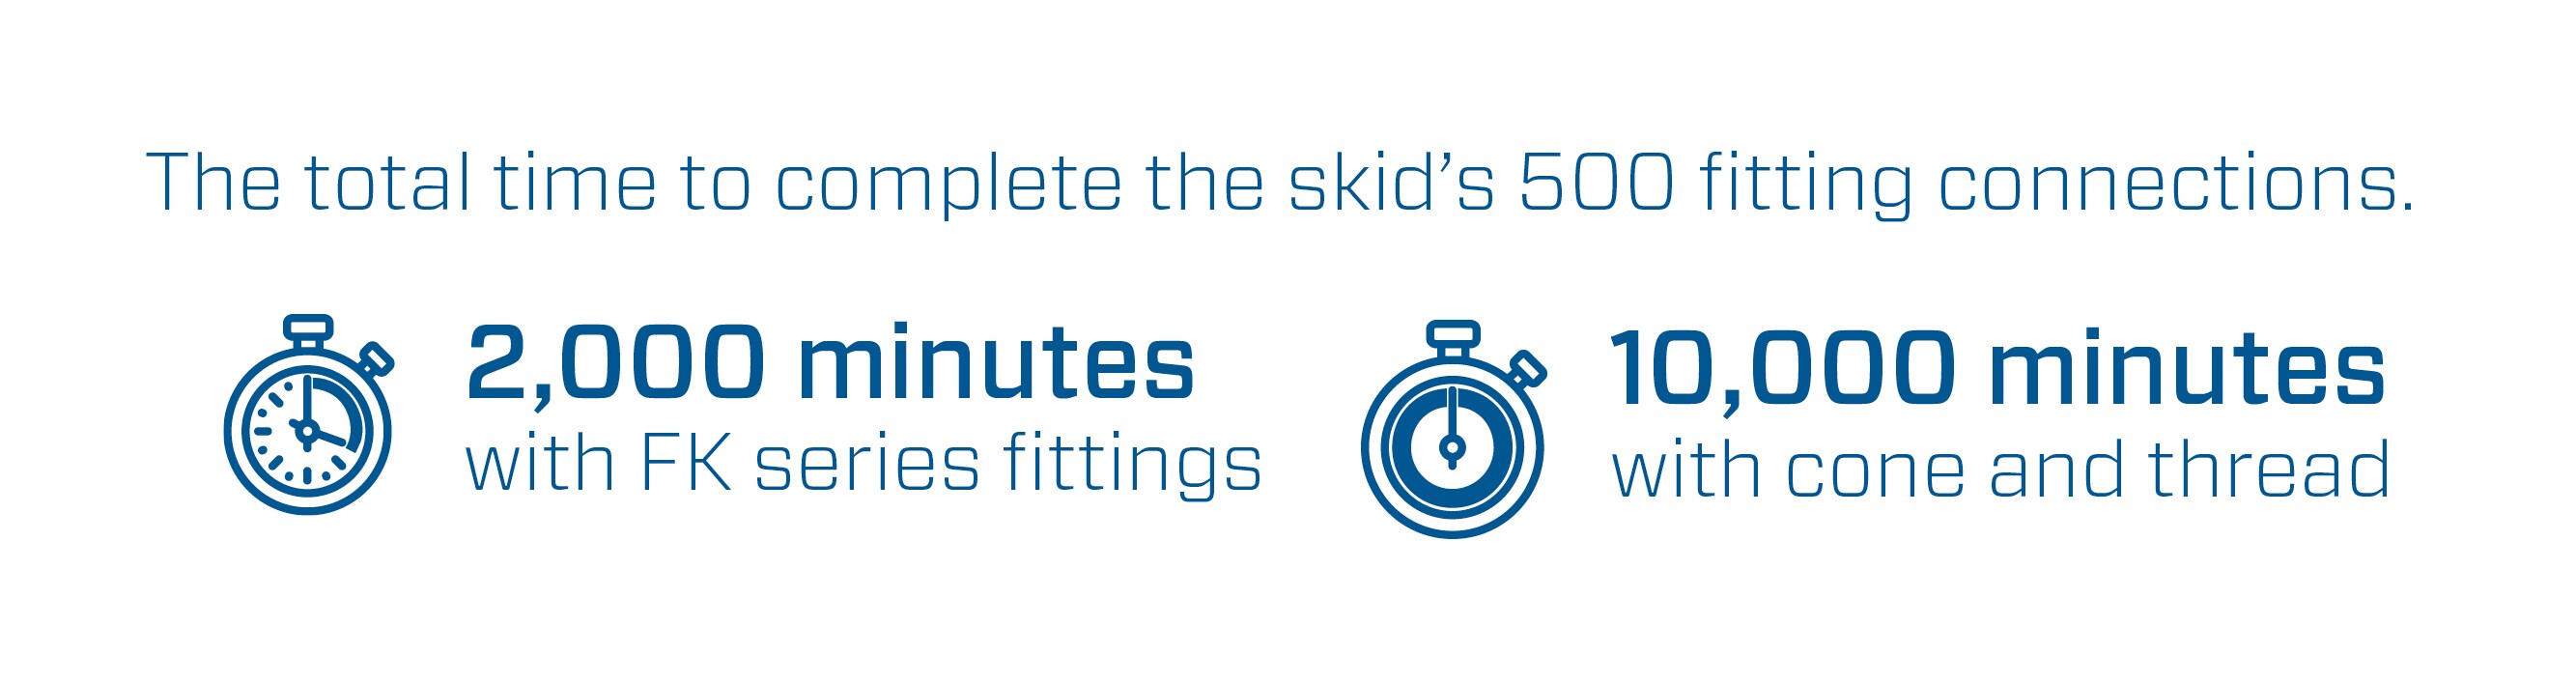 FK Series Fittings Time Savings Infographic